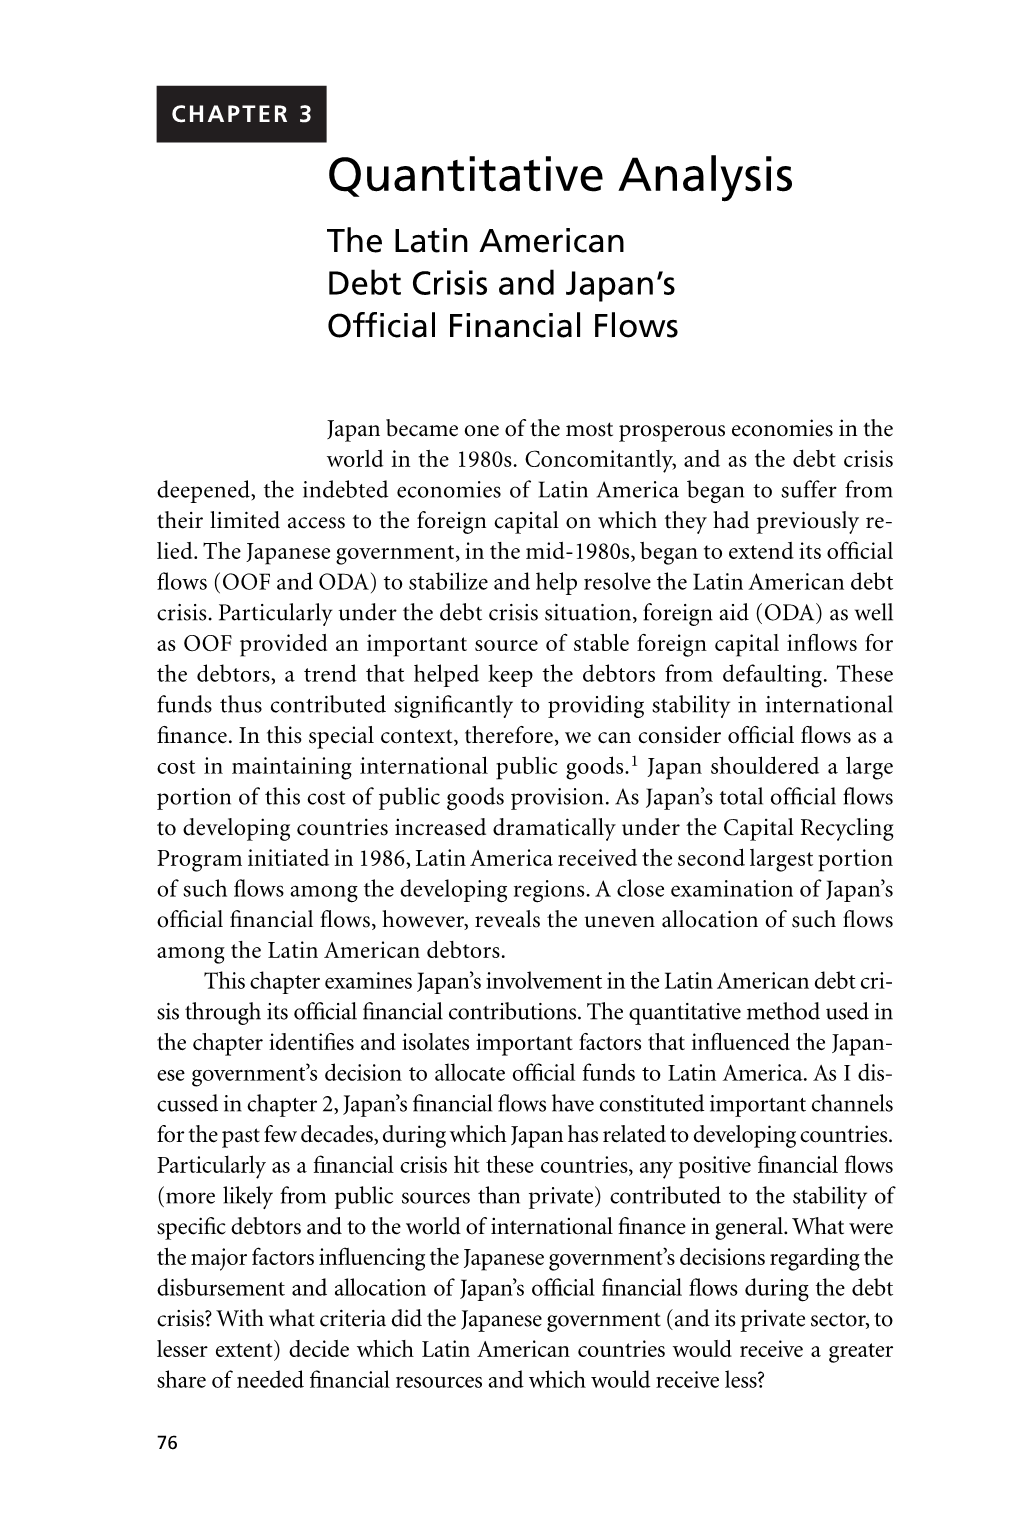 The Latin American Debt Crisis and Japan's Official Financial Flows